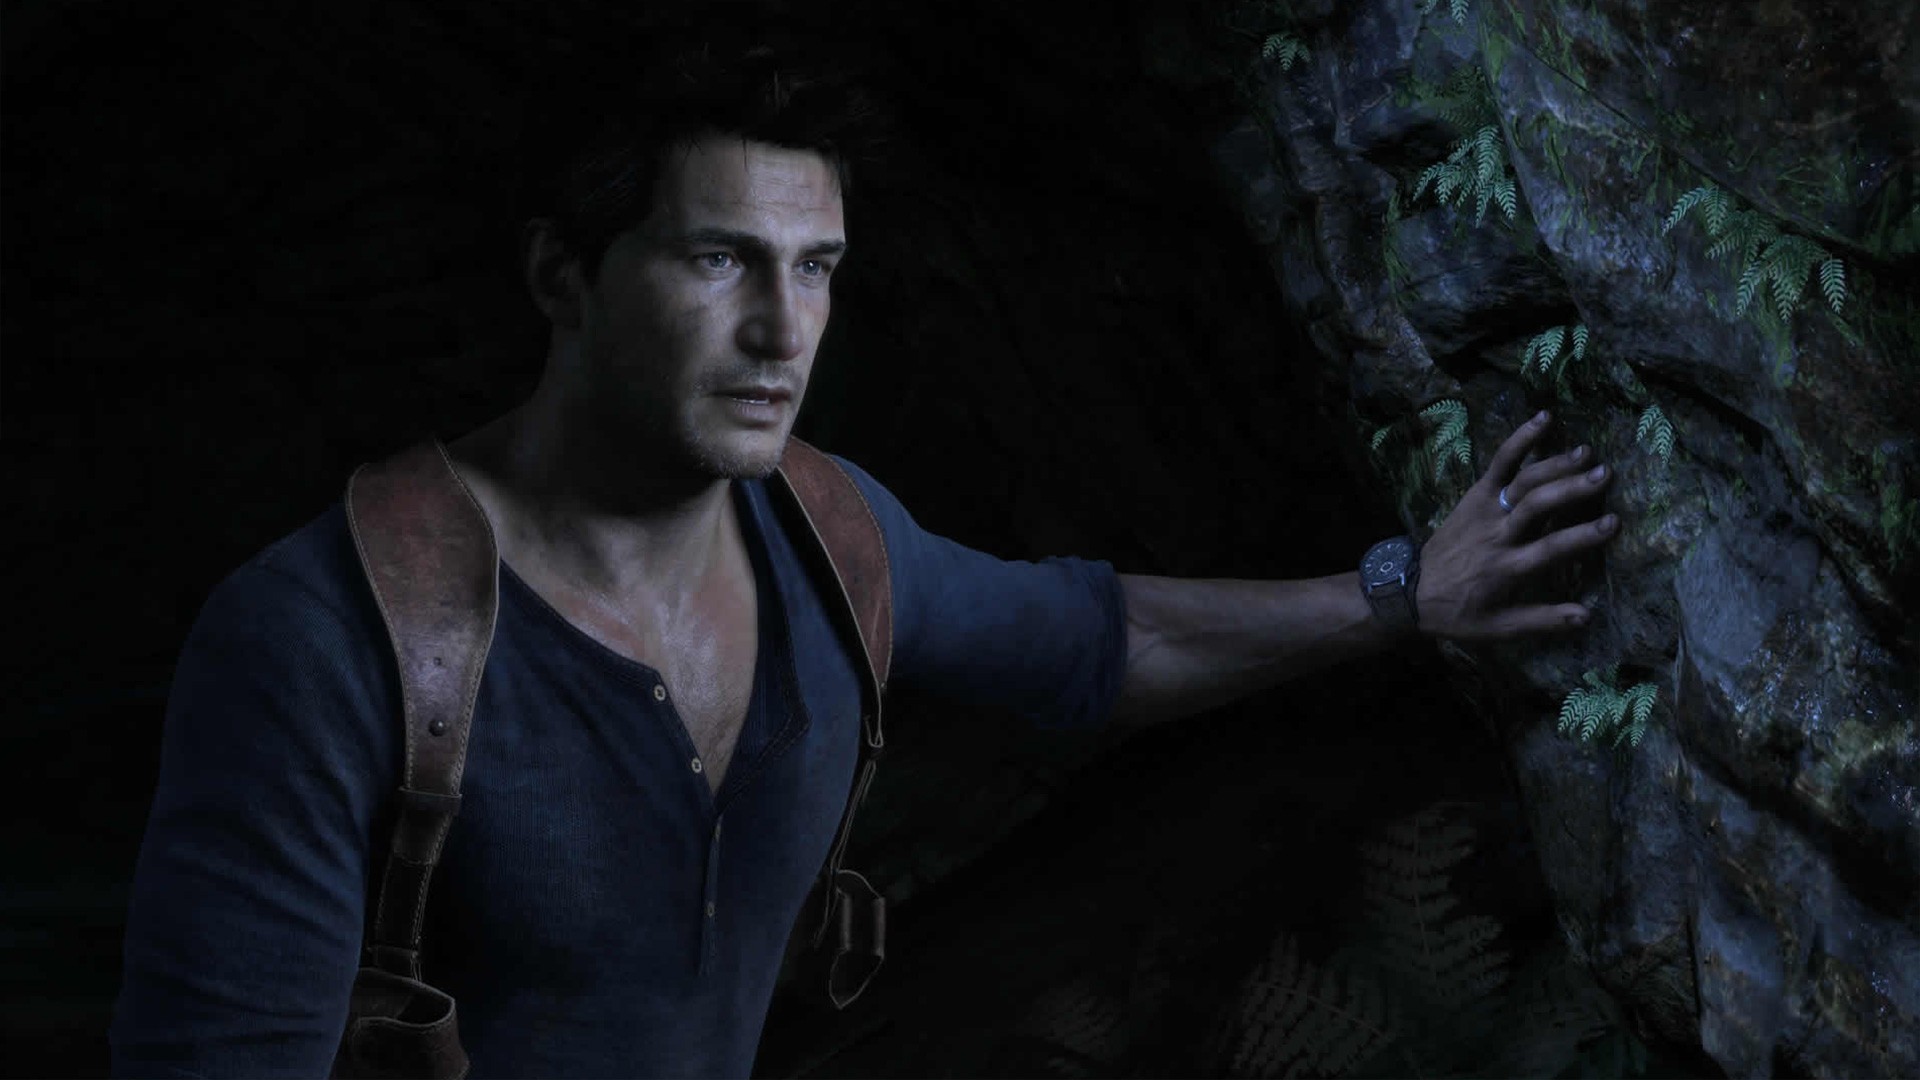 Winner: Uncharted 4: Among Thieves